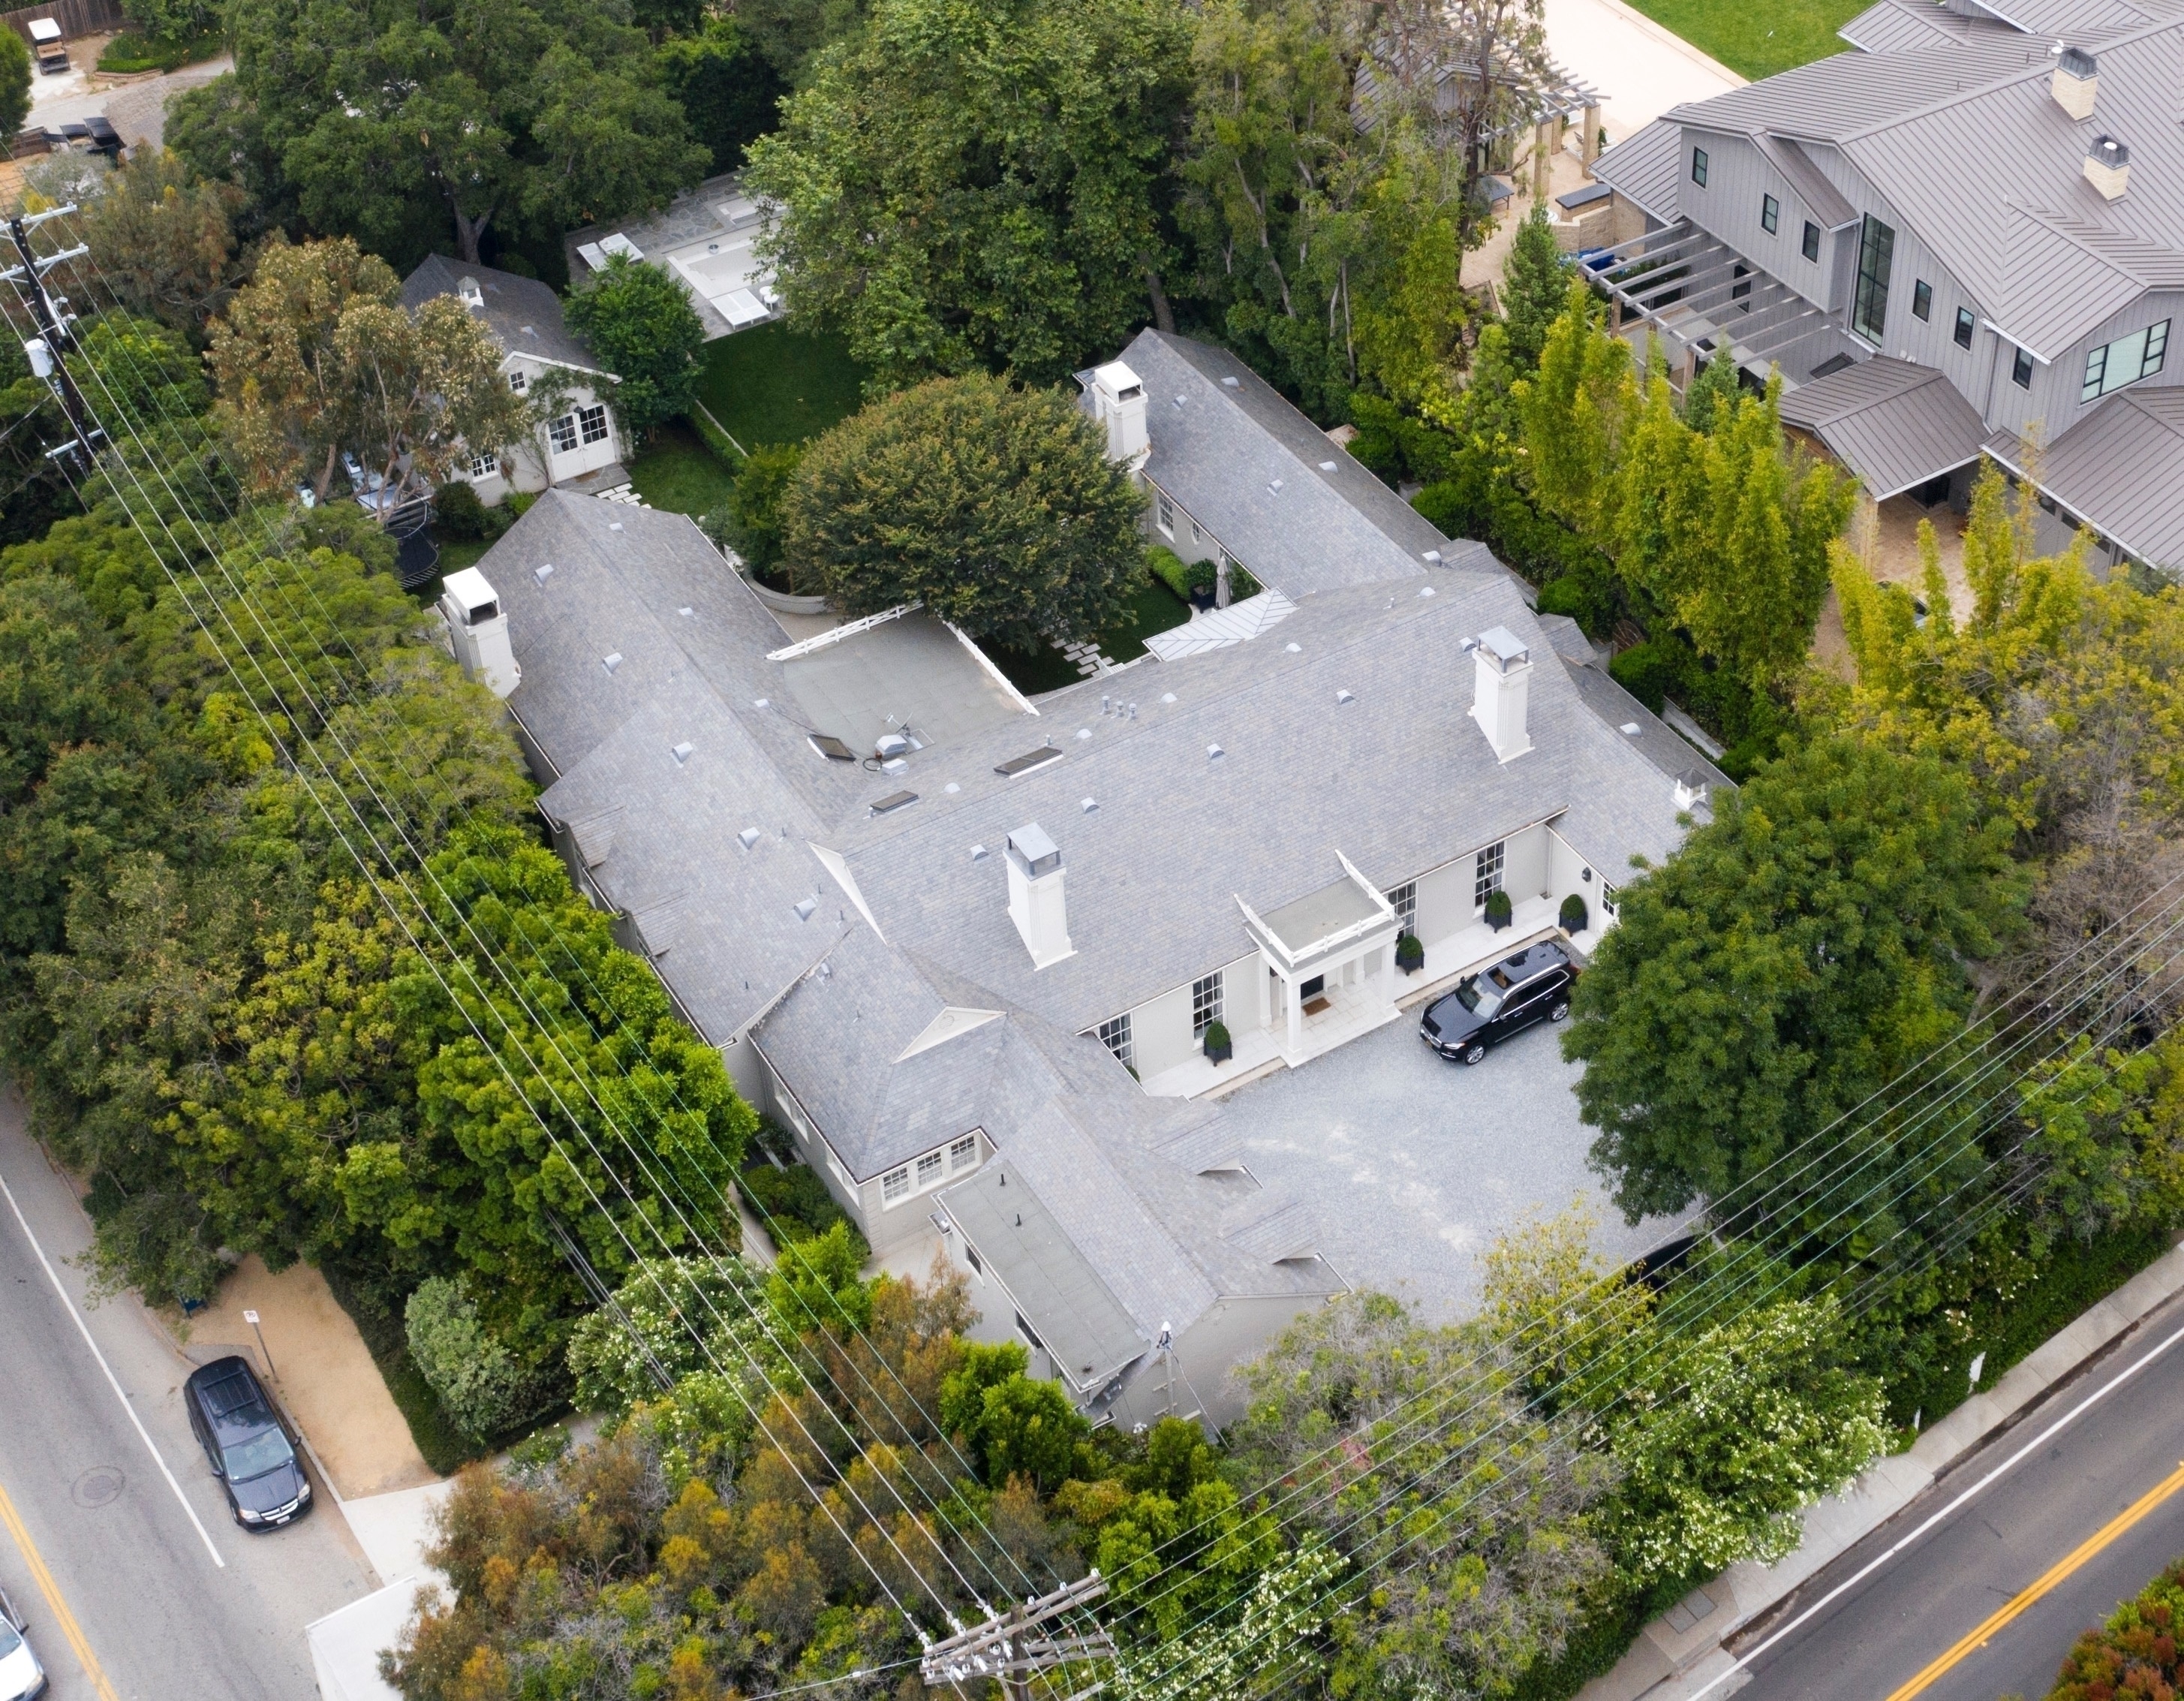 Gwyneth also owns this mansion in Brentwood